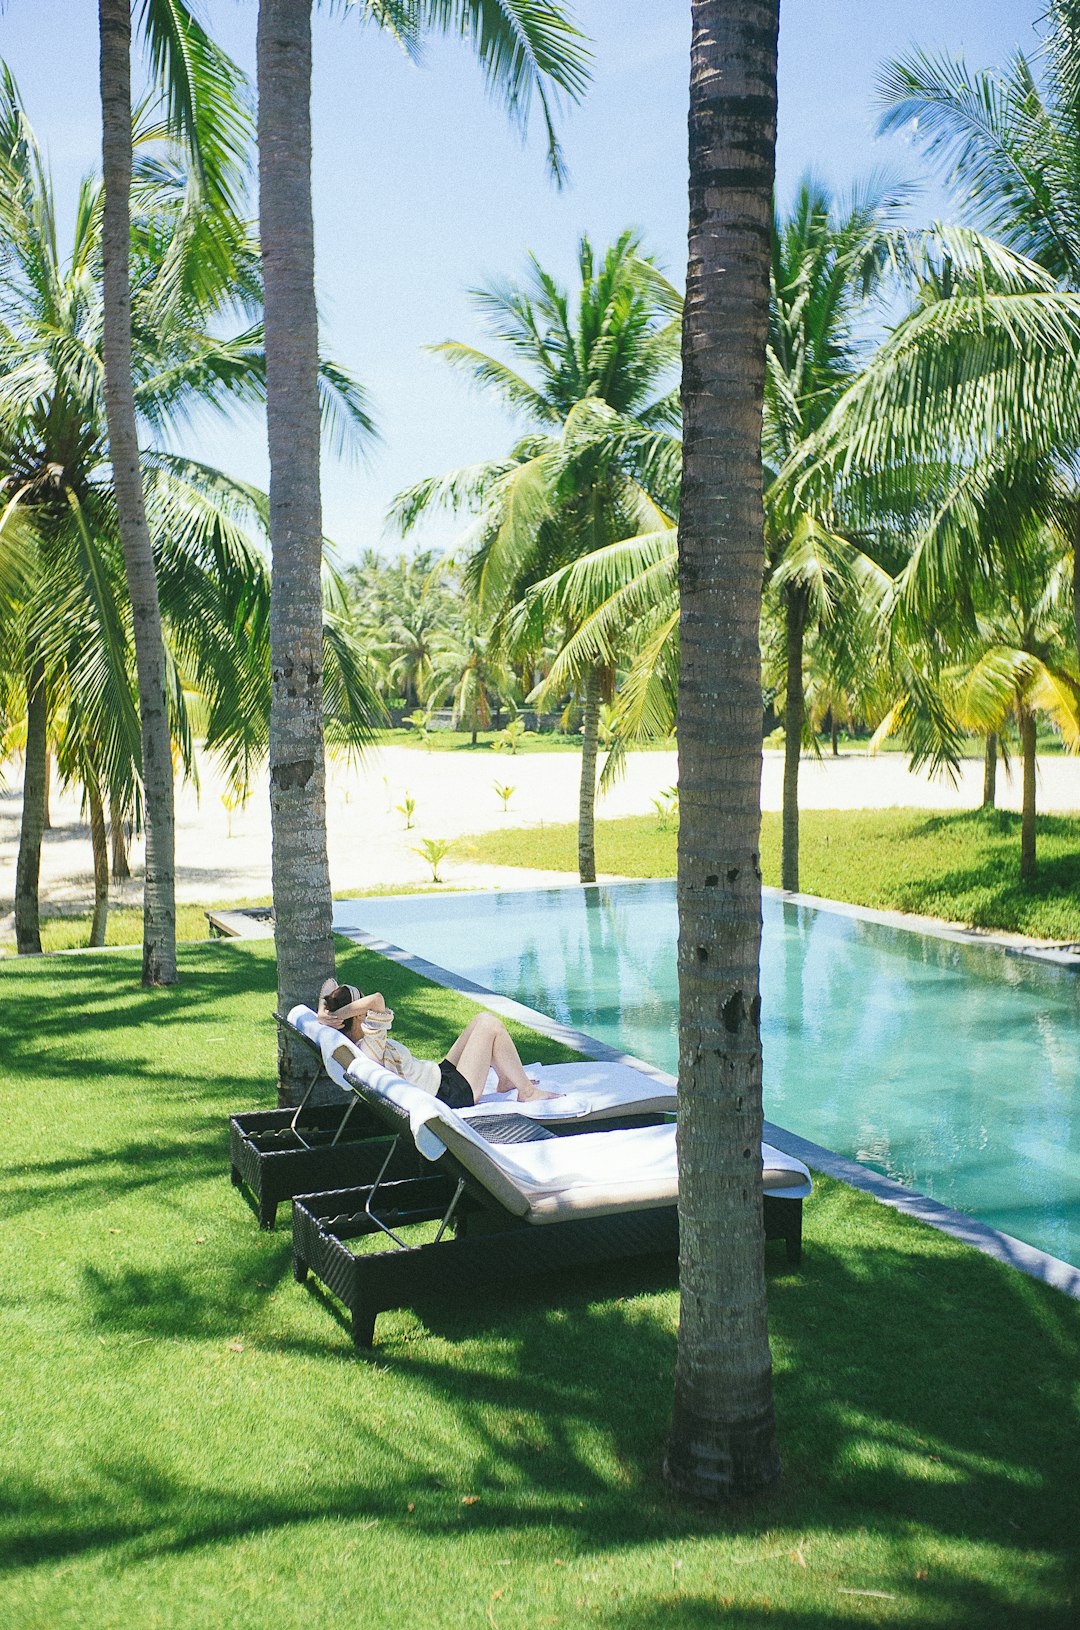 Travel Tips and Stories of Four Seasons Resort The Nam Hai in Vietnam